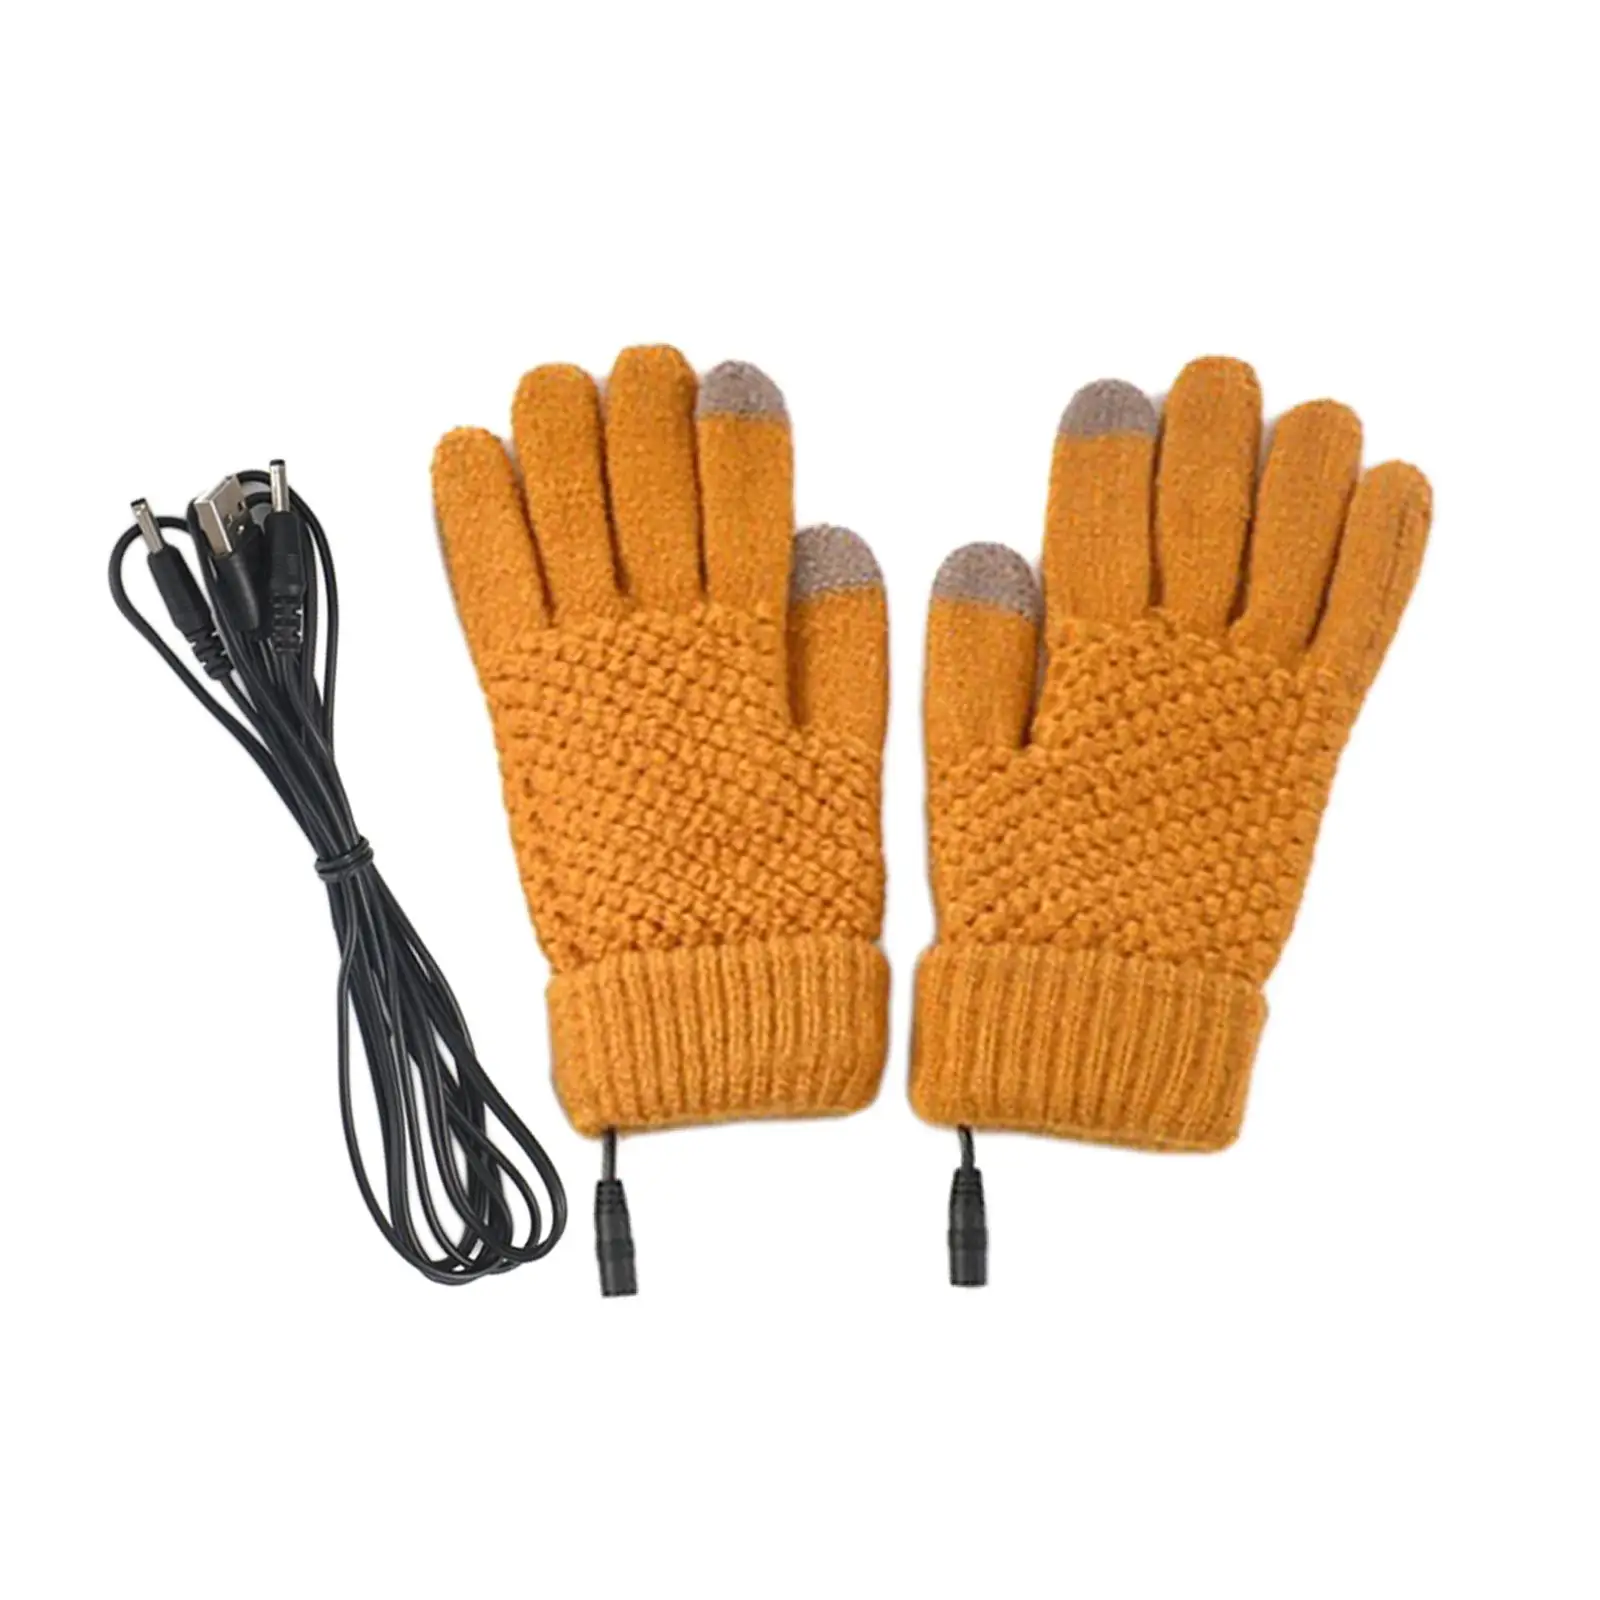 USB Heated Gloves Electric Washable Warm Full Finger Stretchy Warm Gloves Hands Warmer for Typing Skiing Cycling Hiking Outdoor